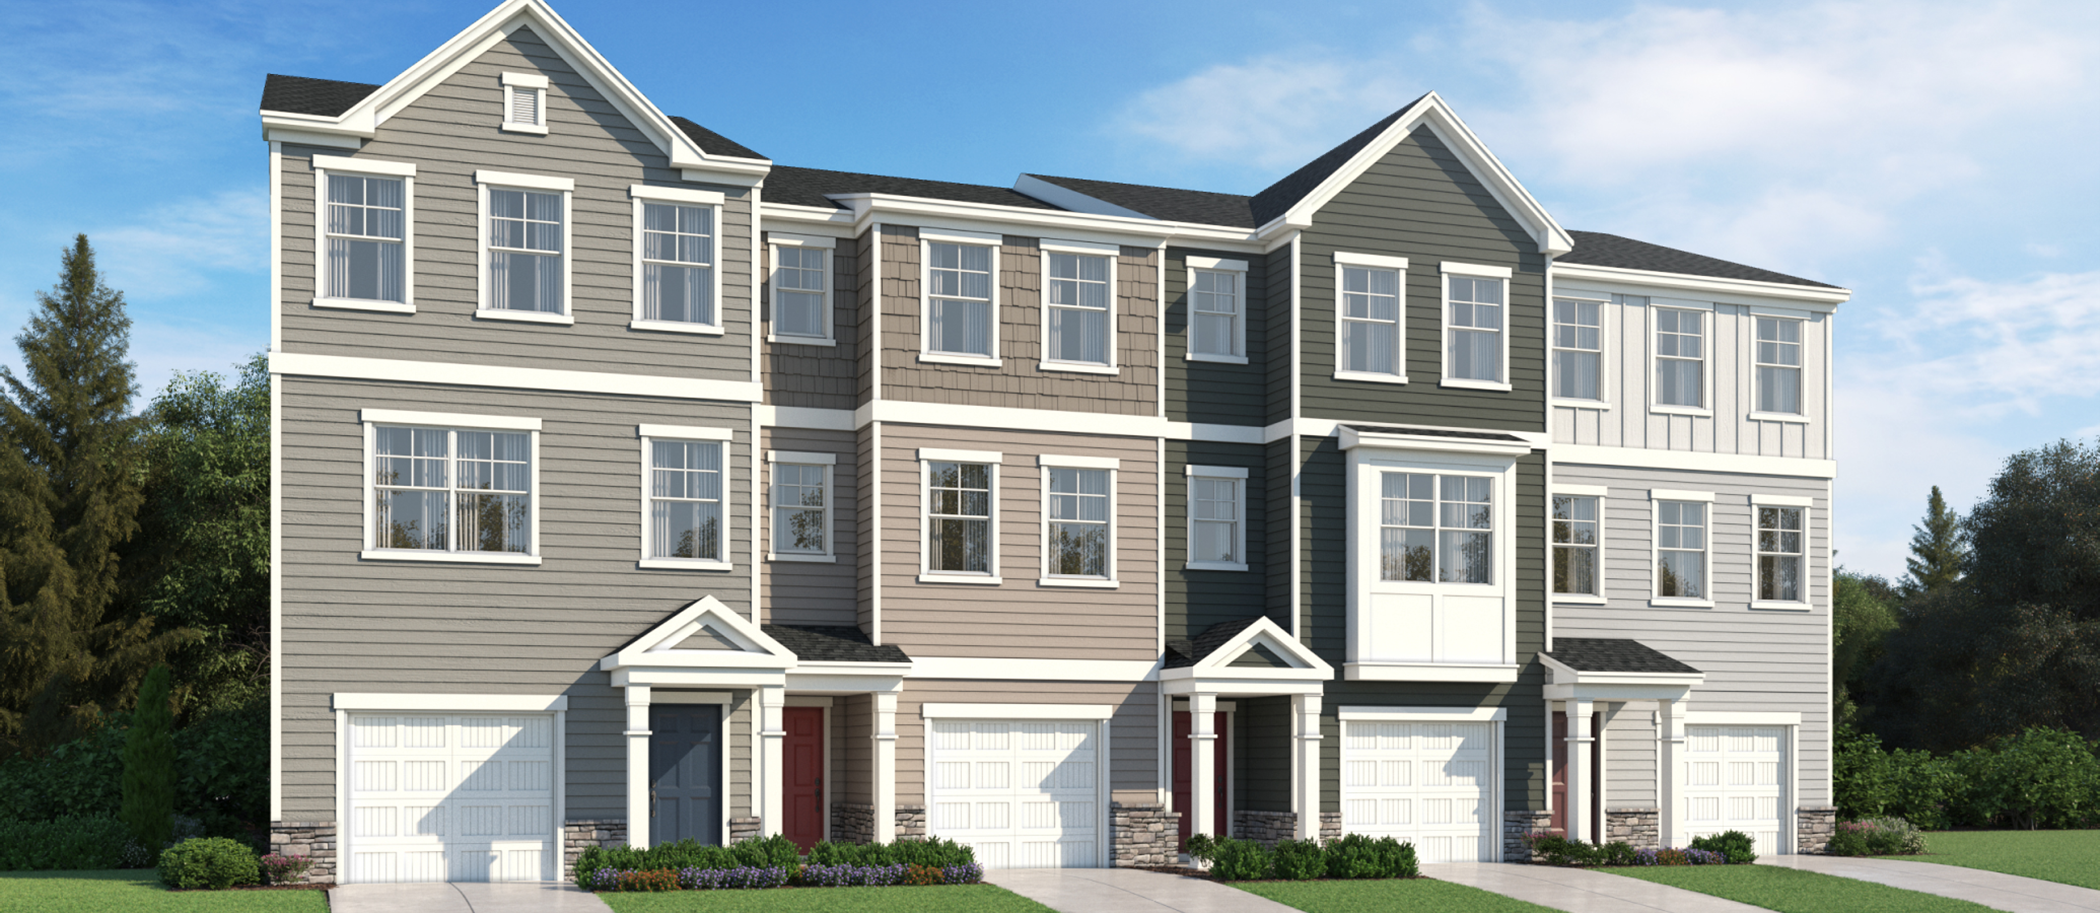 Trace at Olde Towne exterior rendering